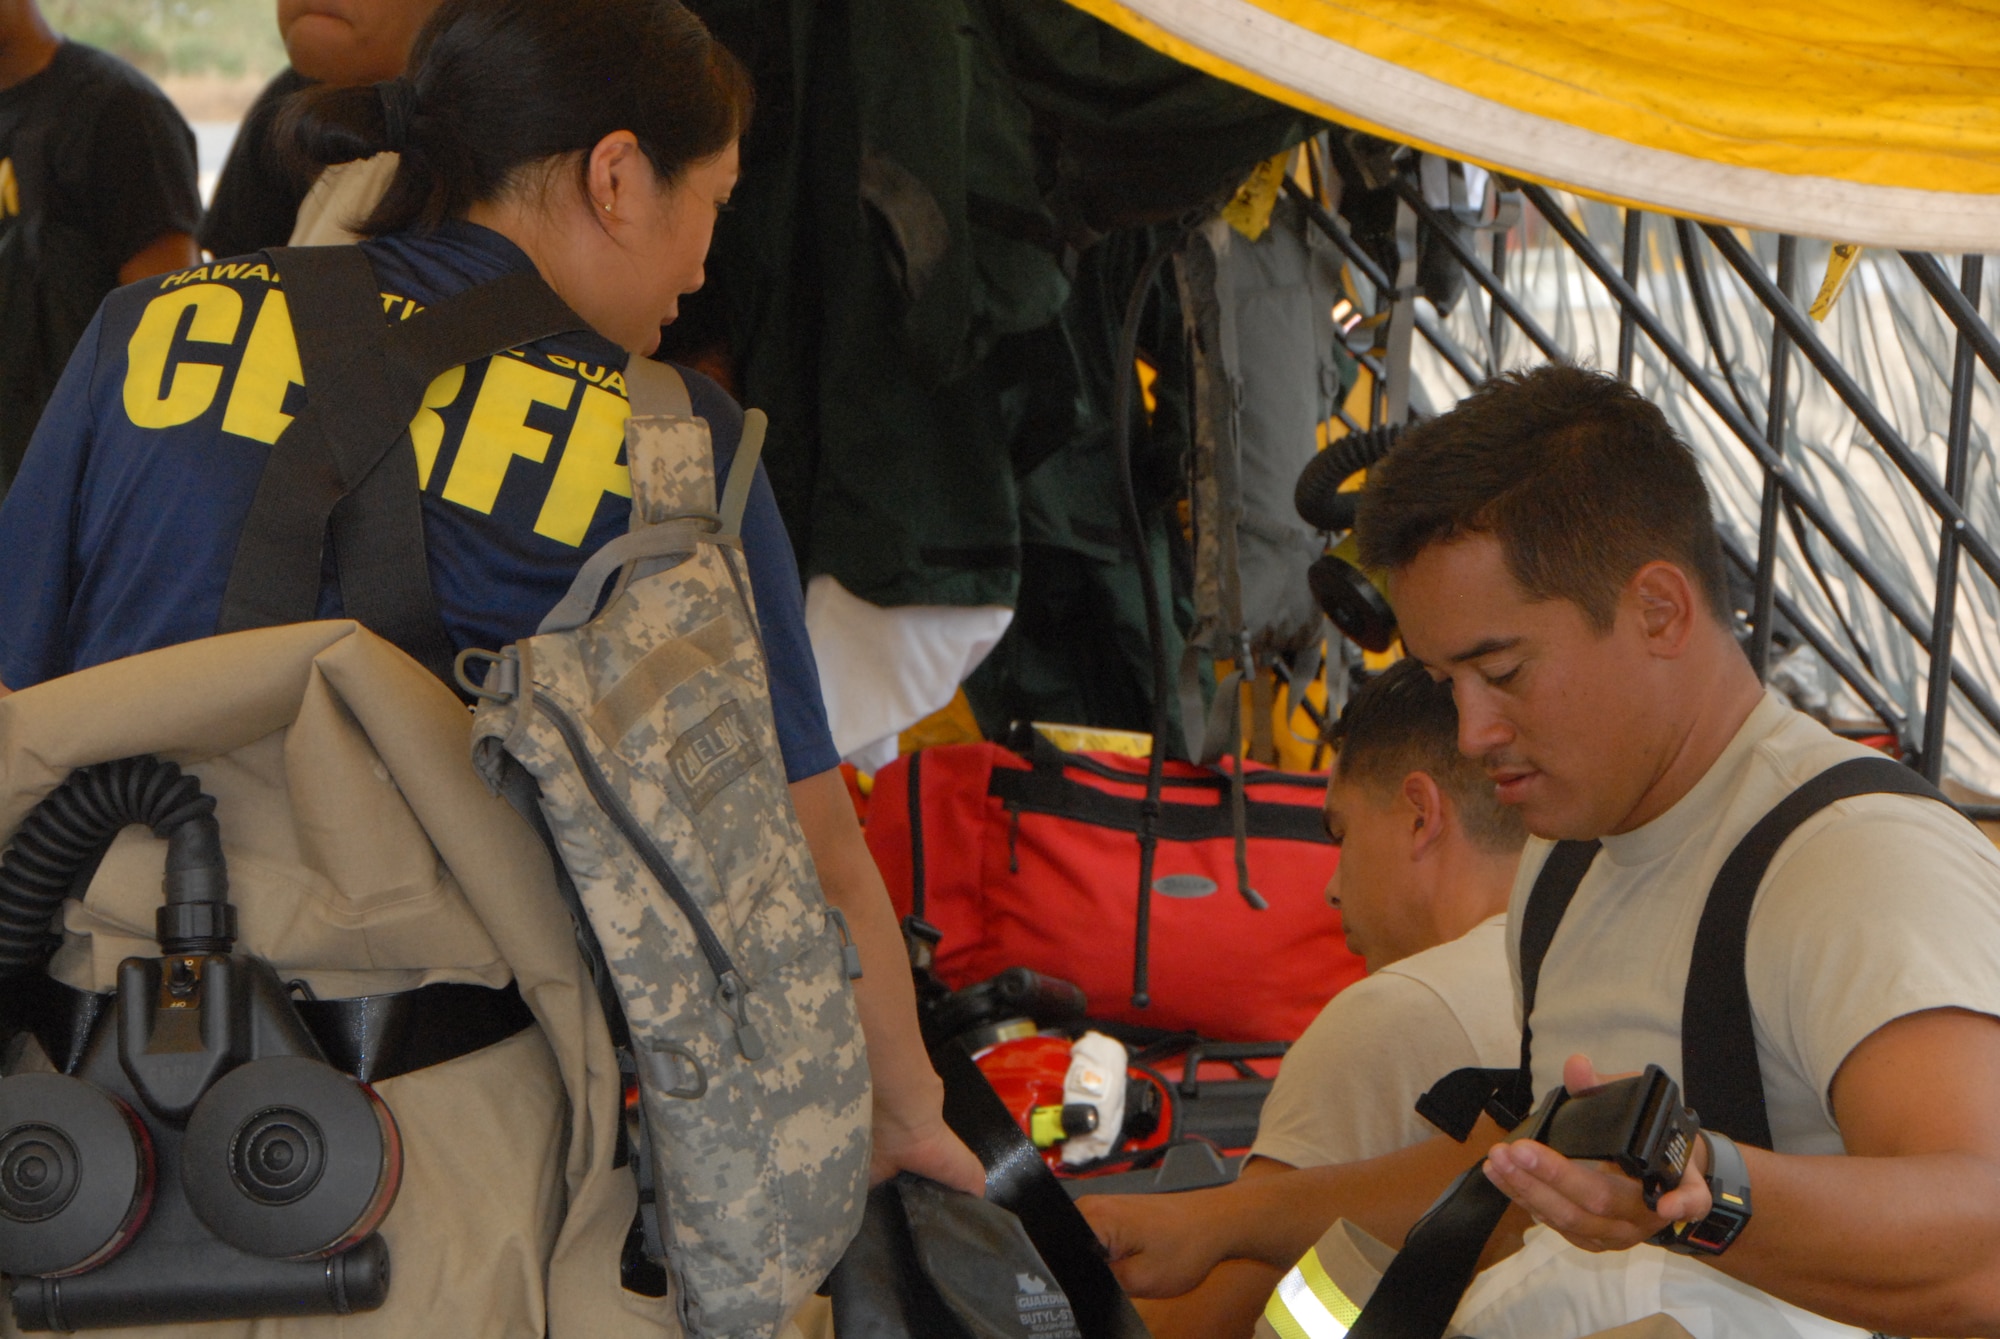 Airmen from the Hawaii Air National Guard's Detachment 1, Headquarters 154th Medical prepare for search and rescue scenarios during a Collective Training Exercise at Kalaeloa, Hawaii, Mar. 23, 2016. This was the first CTE since the unit was stood up in Nov. 2015. The exercise was designed to test the Hawaii National Guard’s Chemical, Biological, Radiological, Nuclear and Explosive Enhanced Response Force Package. (U.S. Air National Guard photo by Senior Airman Orlando Corpuz/released)